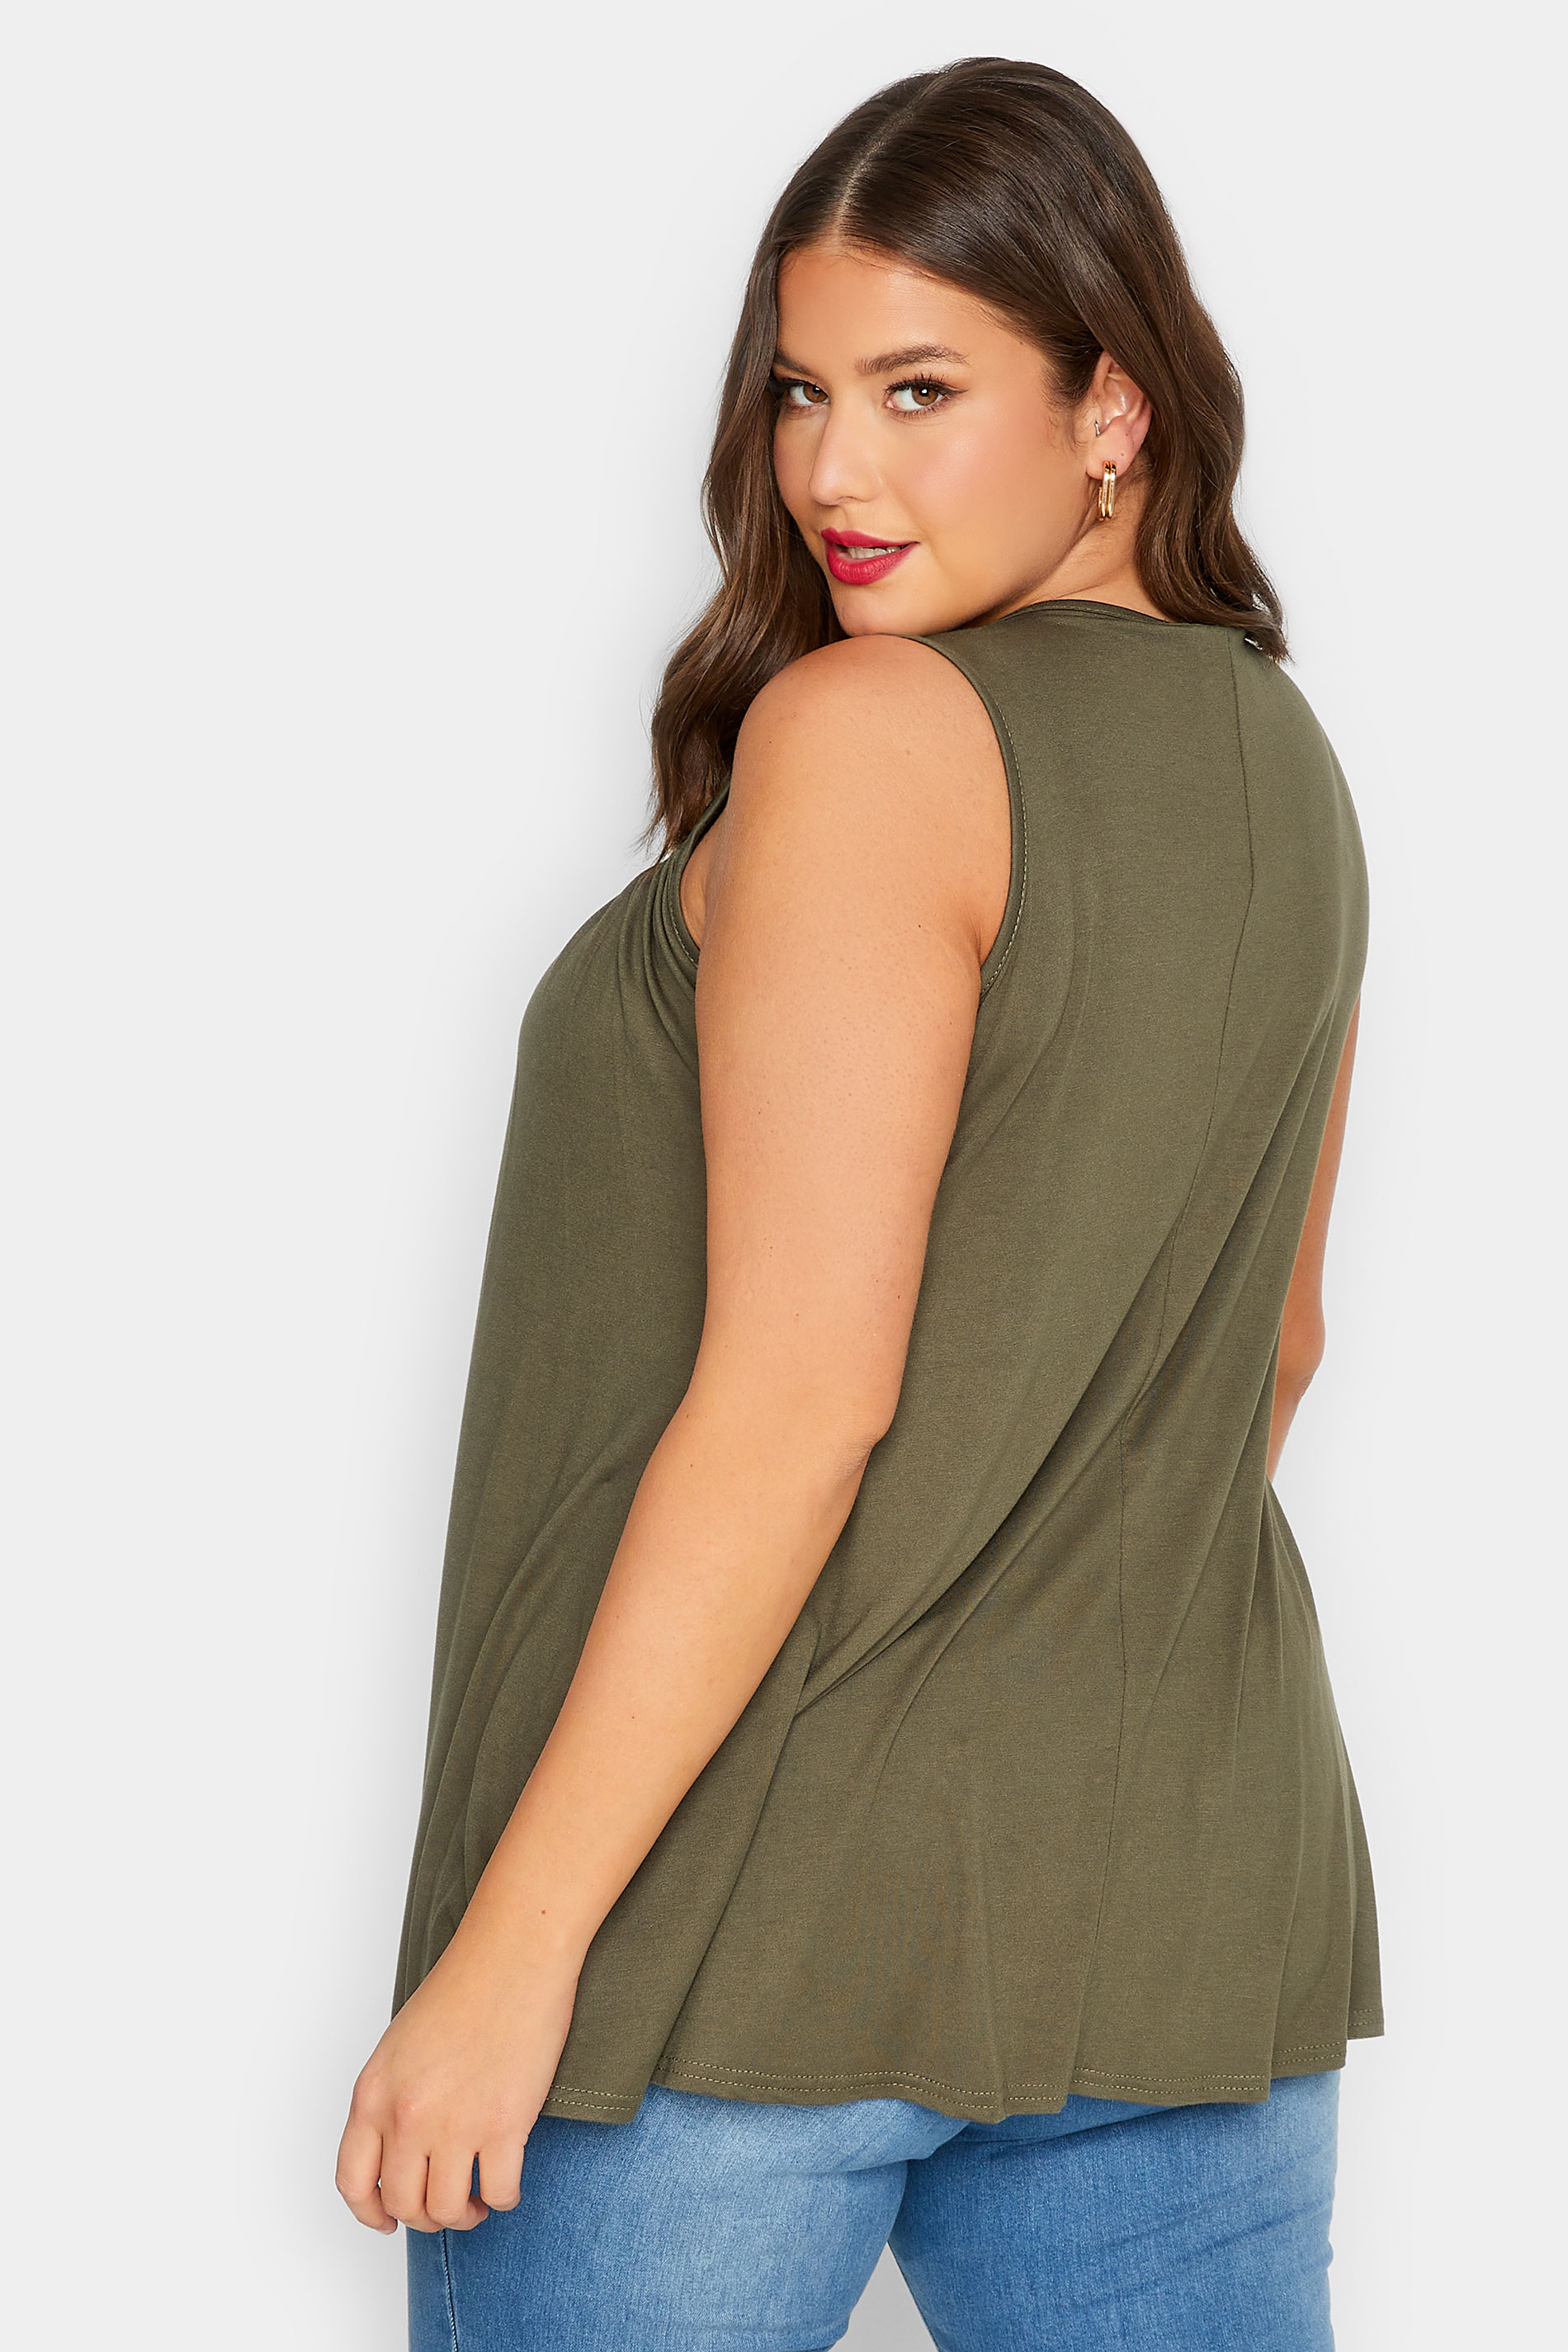 LIMITED COLLECTION Plus Size Khaki Green Broderie Anglaise Insert Vest Top | Yours Clothing 3